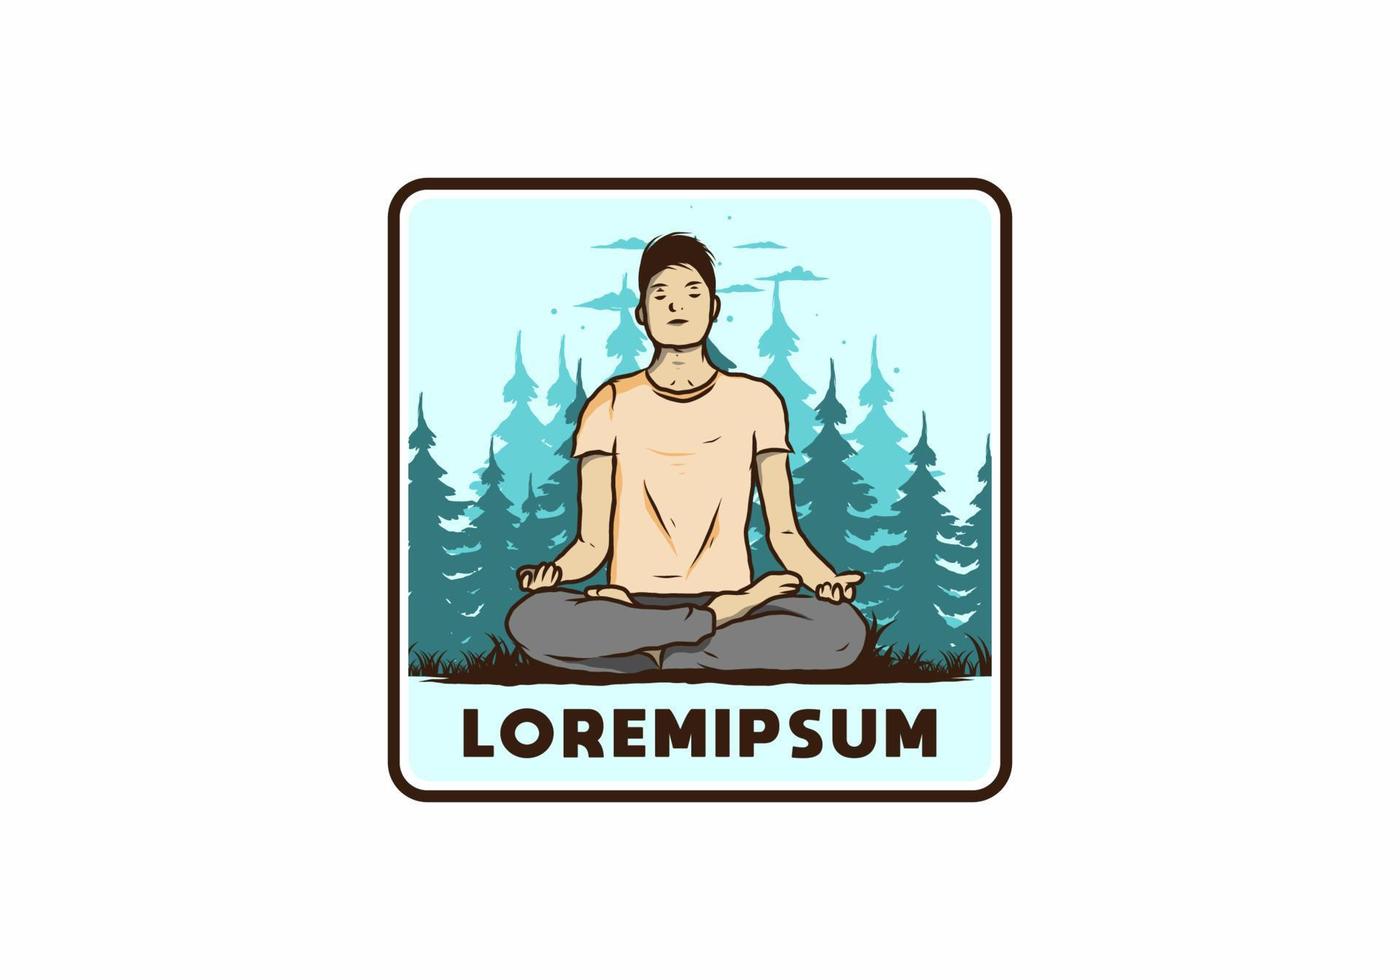 illustration of a someone doing yoga and meditating outdoors in a forest in nature among pine trees vector